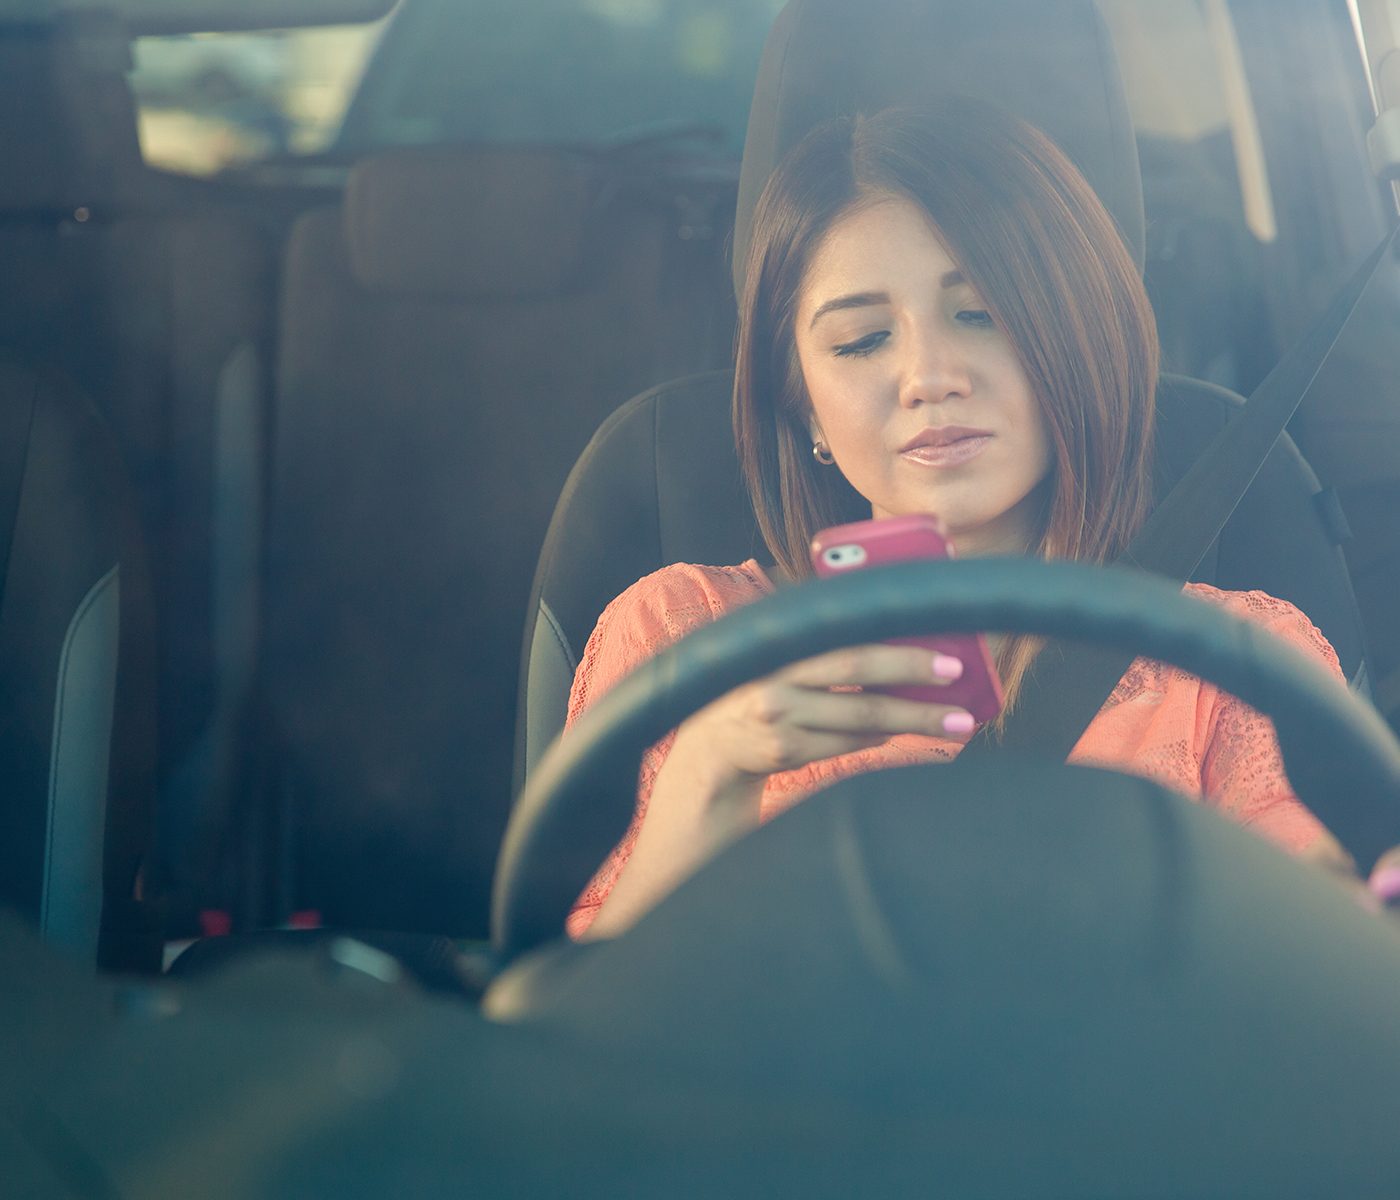 texting while driving image